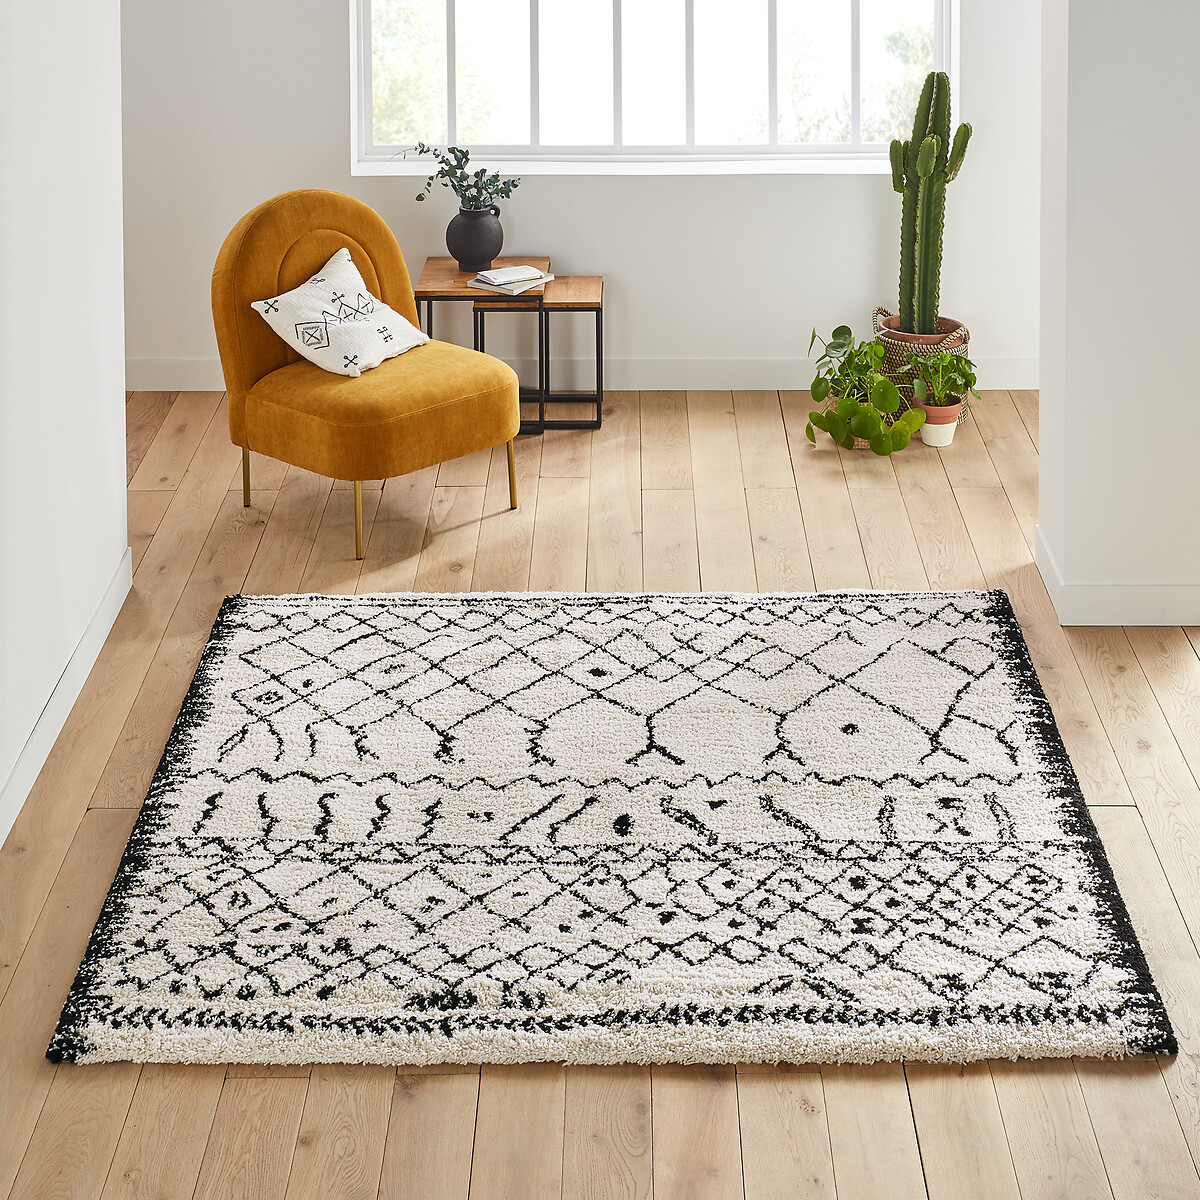 Afaw Square Berber-Style Rug